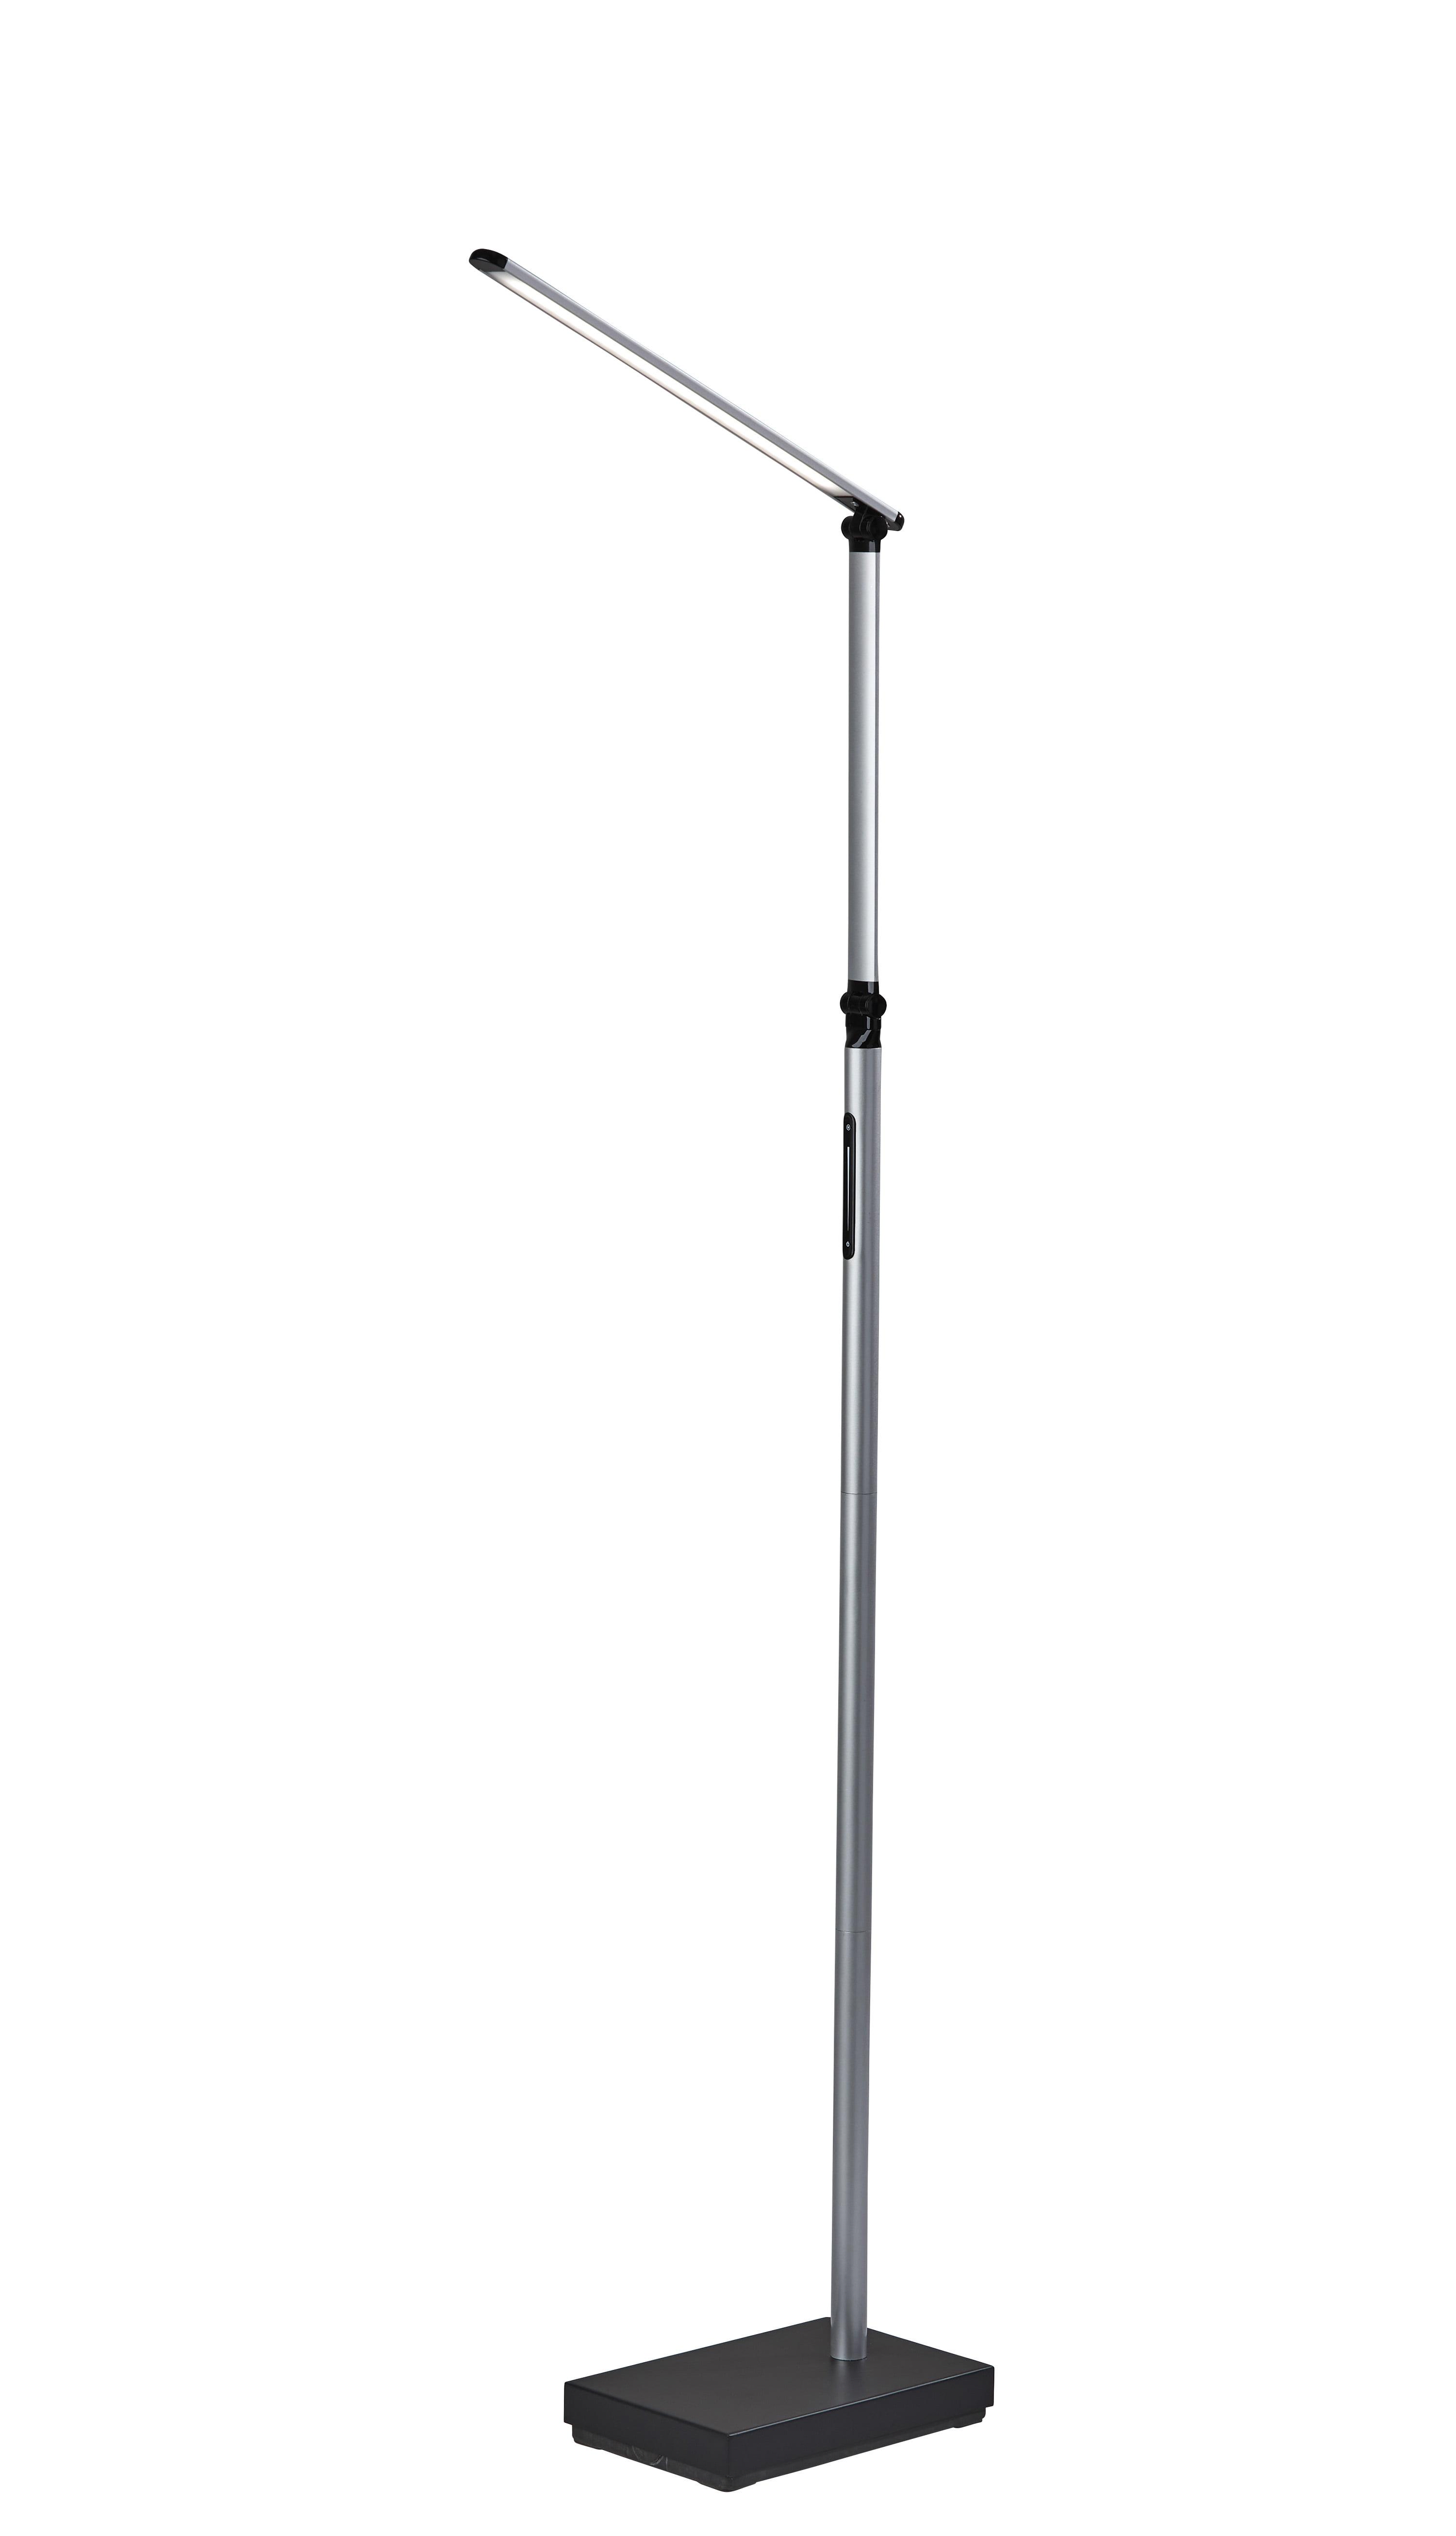 Sleek Black LED Task Floor Lamp with Adjustable Arm and 3-Way Switch